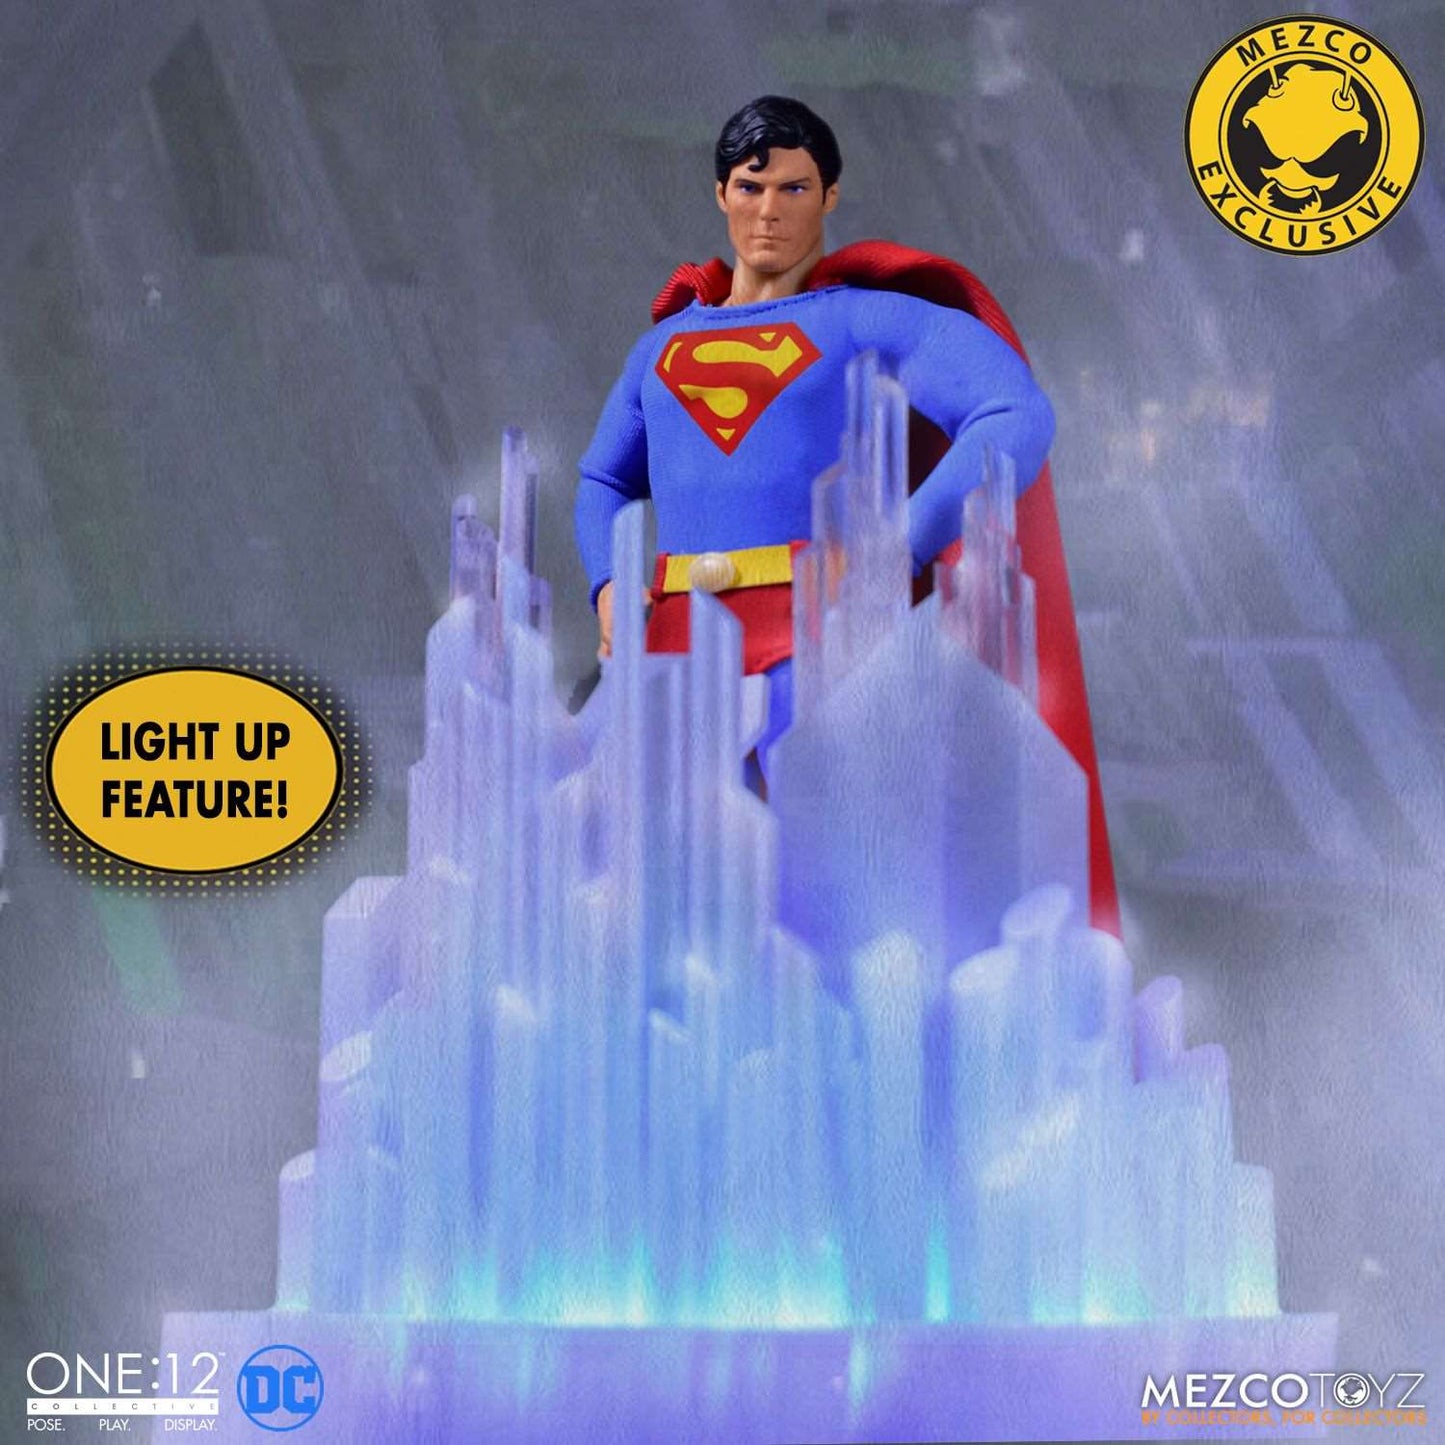 mezco one twelfth collective superman 1978 Christopher Reeve edition figure Fortress of Solitude base light up feature